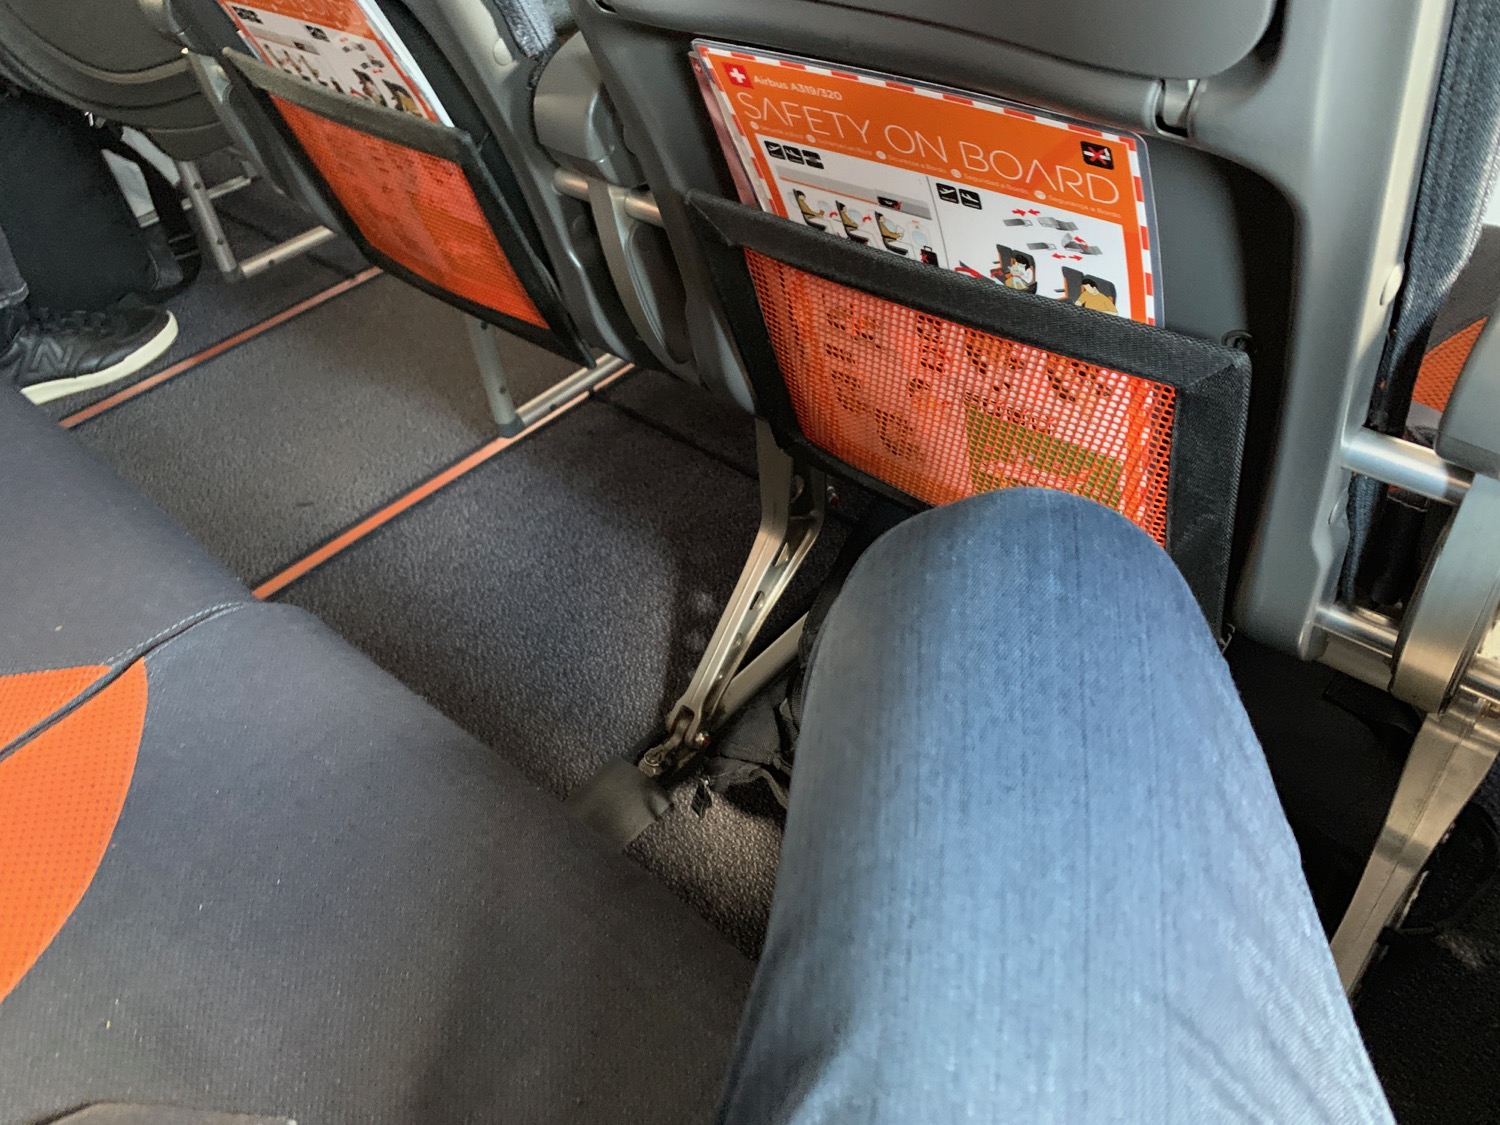 a person's leg in a seat with safety signs in the back of the seat